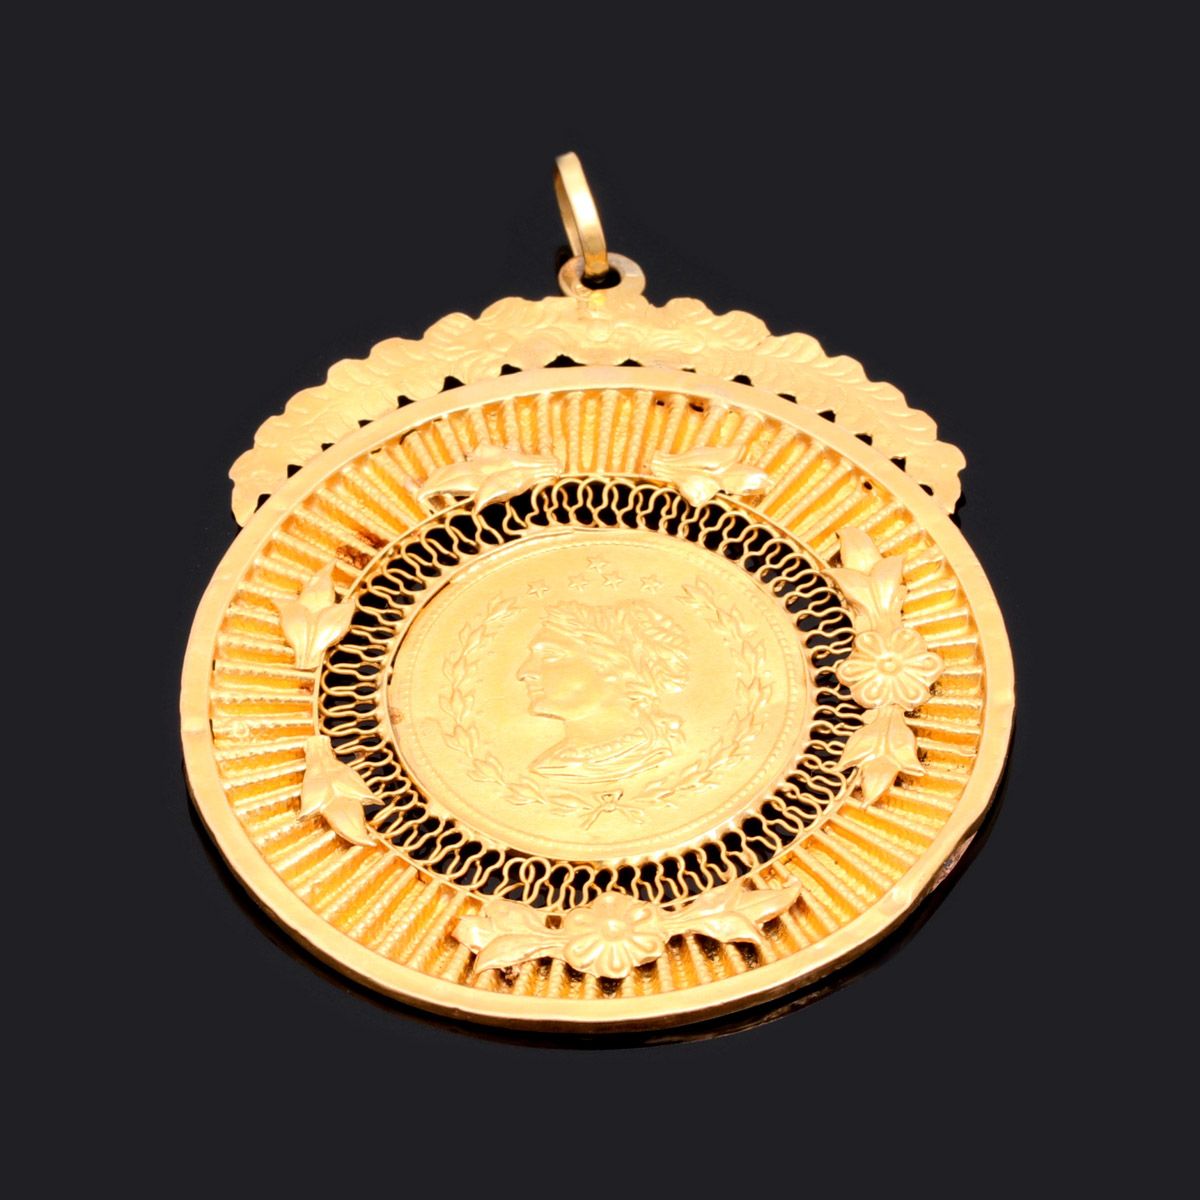 A MEDAL A MEDAL 800/000 gold, Porto assay mark (1938-1984). Weight: 5.9 g.